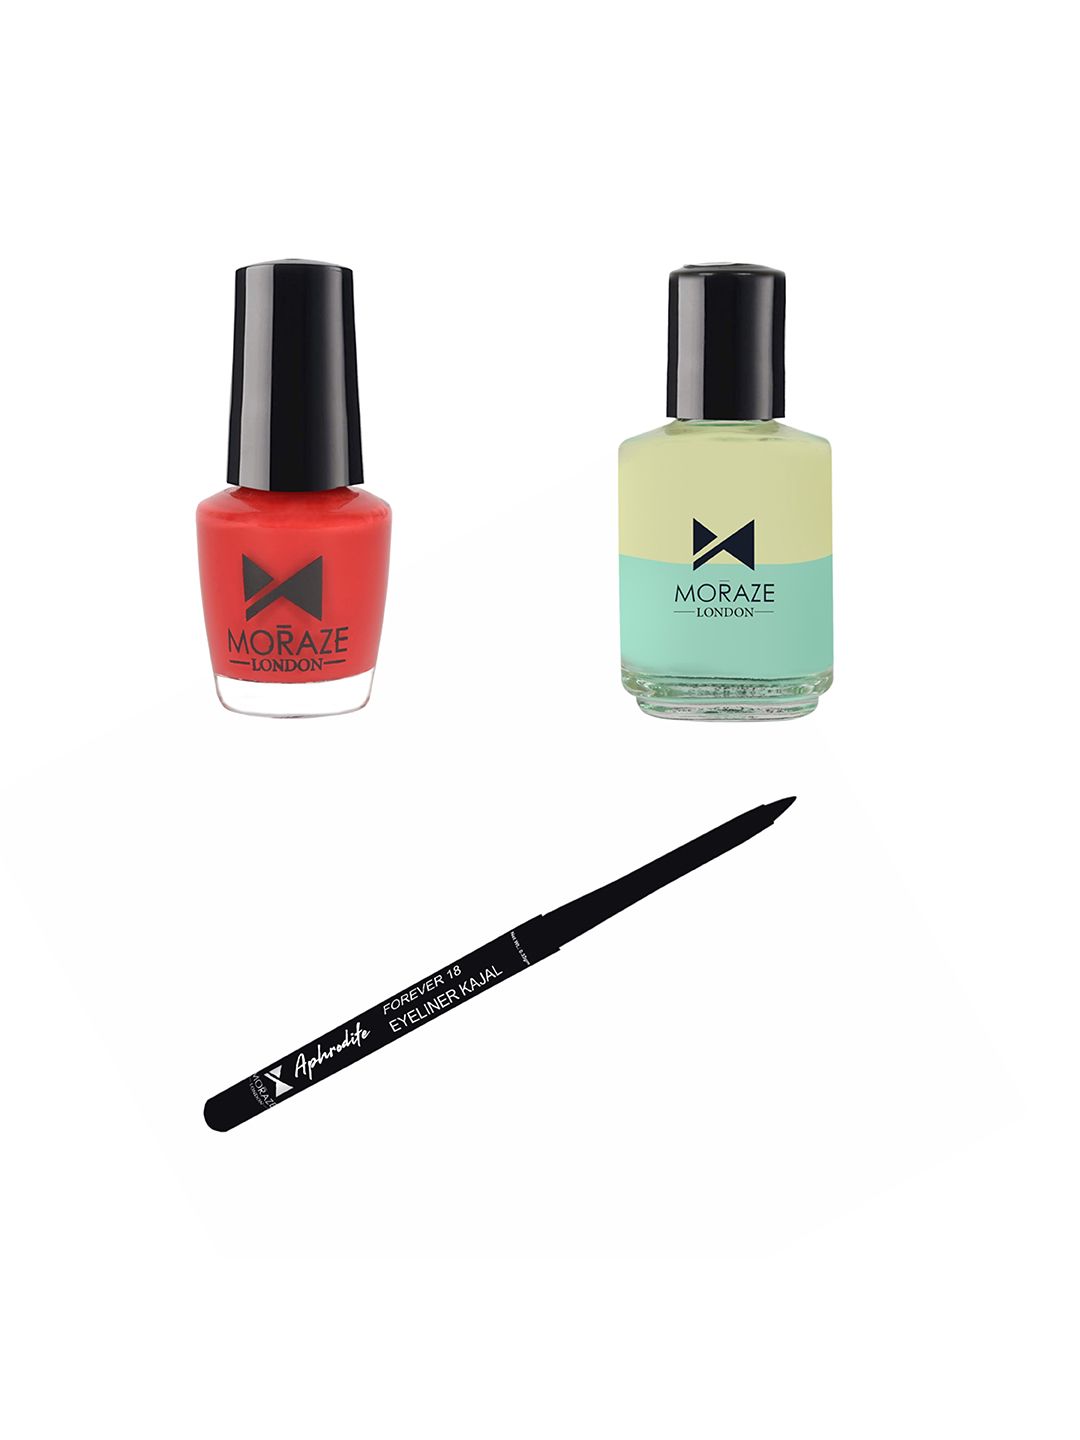 Moraze Pack of Kajal with 1 Nail Polish (Summer Dream), 5 ML, 1 Nail Paint Remover (30 ML) Price in India